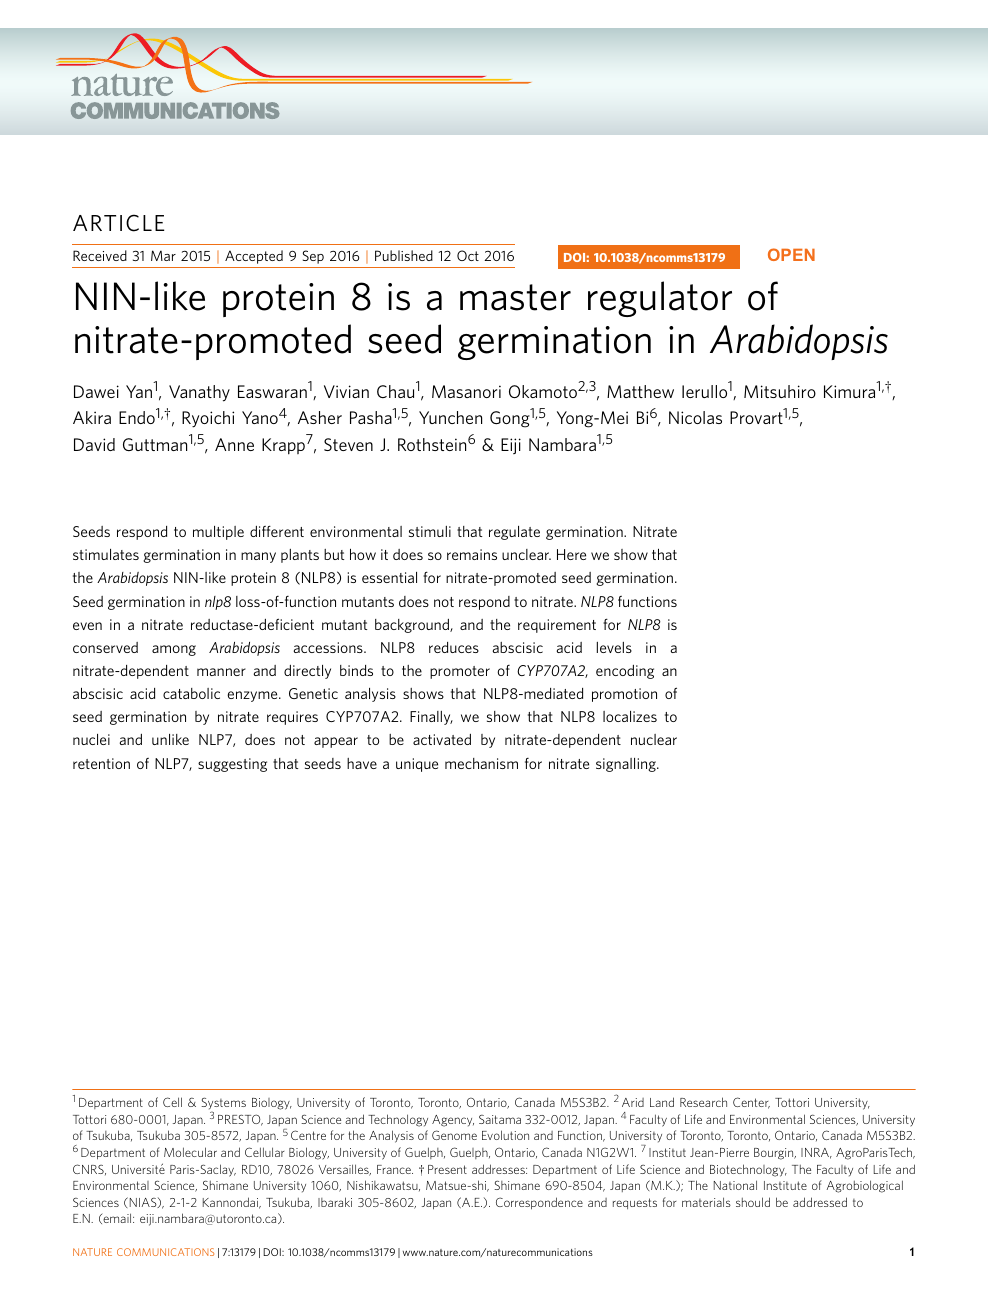 Nin Like Protein 8 Is A Master Regulator Of Nitrate Promoted Seed Germination In Arabidopsis Topic Of Research Paper In Biological Sciences Download Scholarly Article Pdf And Read For Free On Cyberleninka Open